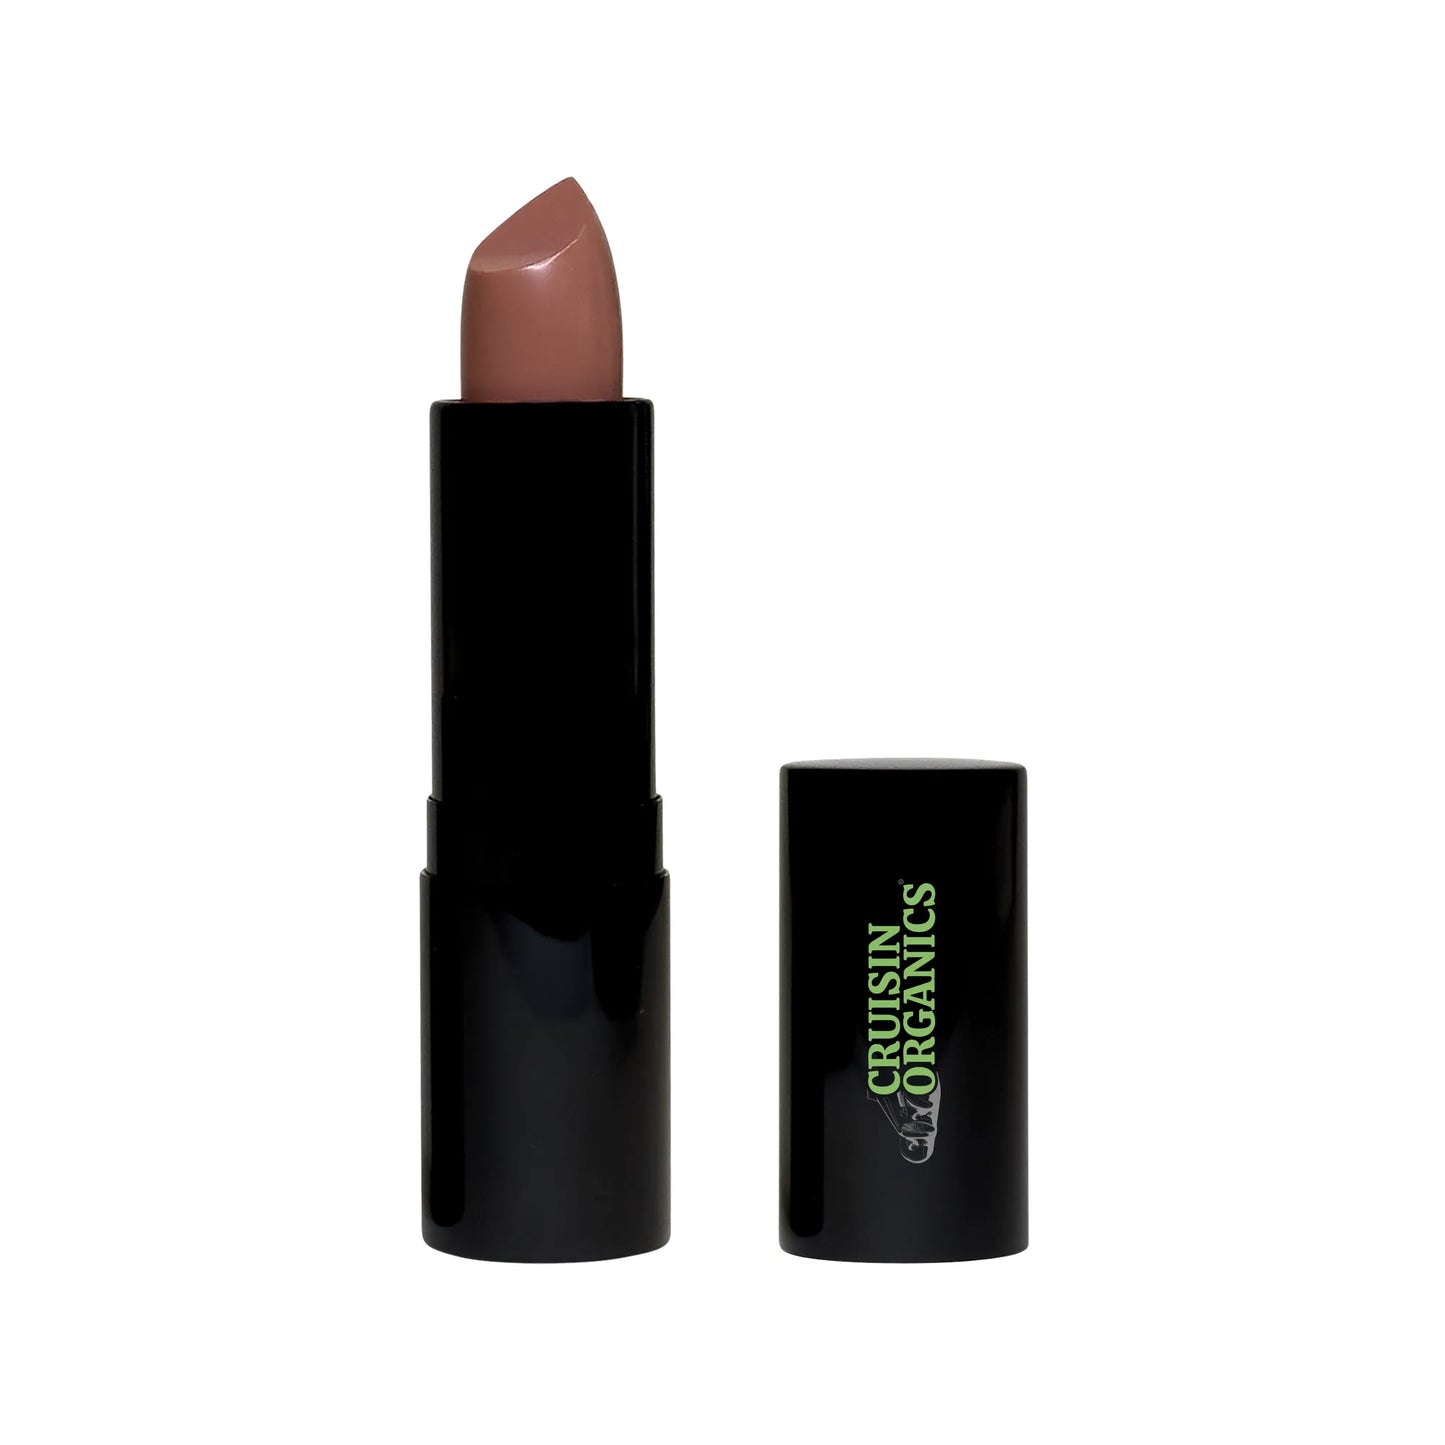 Cruisin Organics Naughty Nude Cream Lipstick for hydrated and full lips with nourishing Vitamin E and oils. Suitable for any occasion, our luxury cream lipstick will elevate your look with dynamic colors.